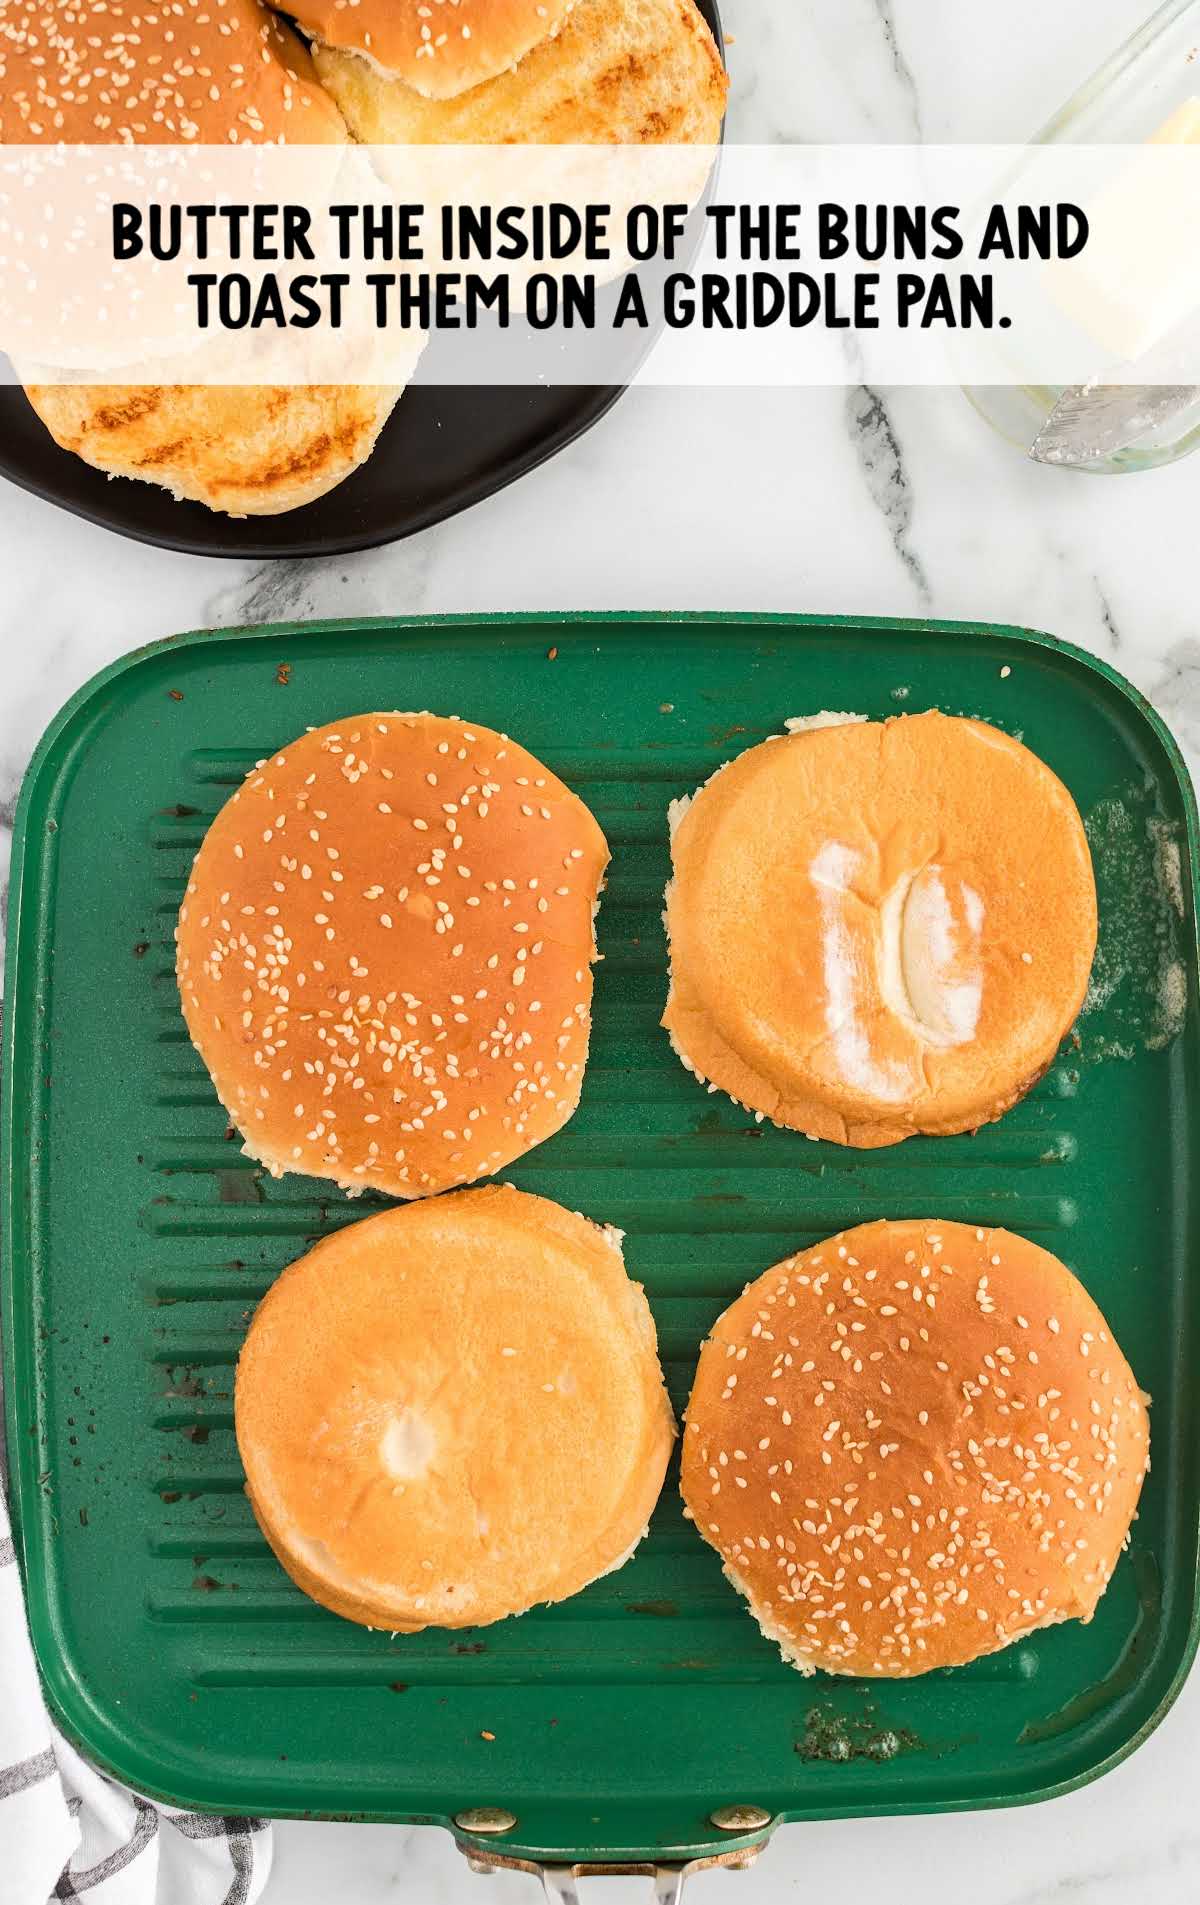 buns being toasted on a griddle pan